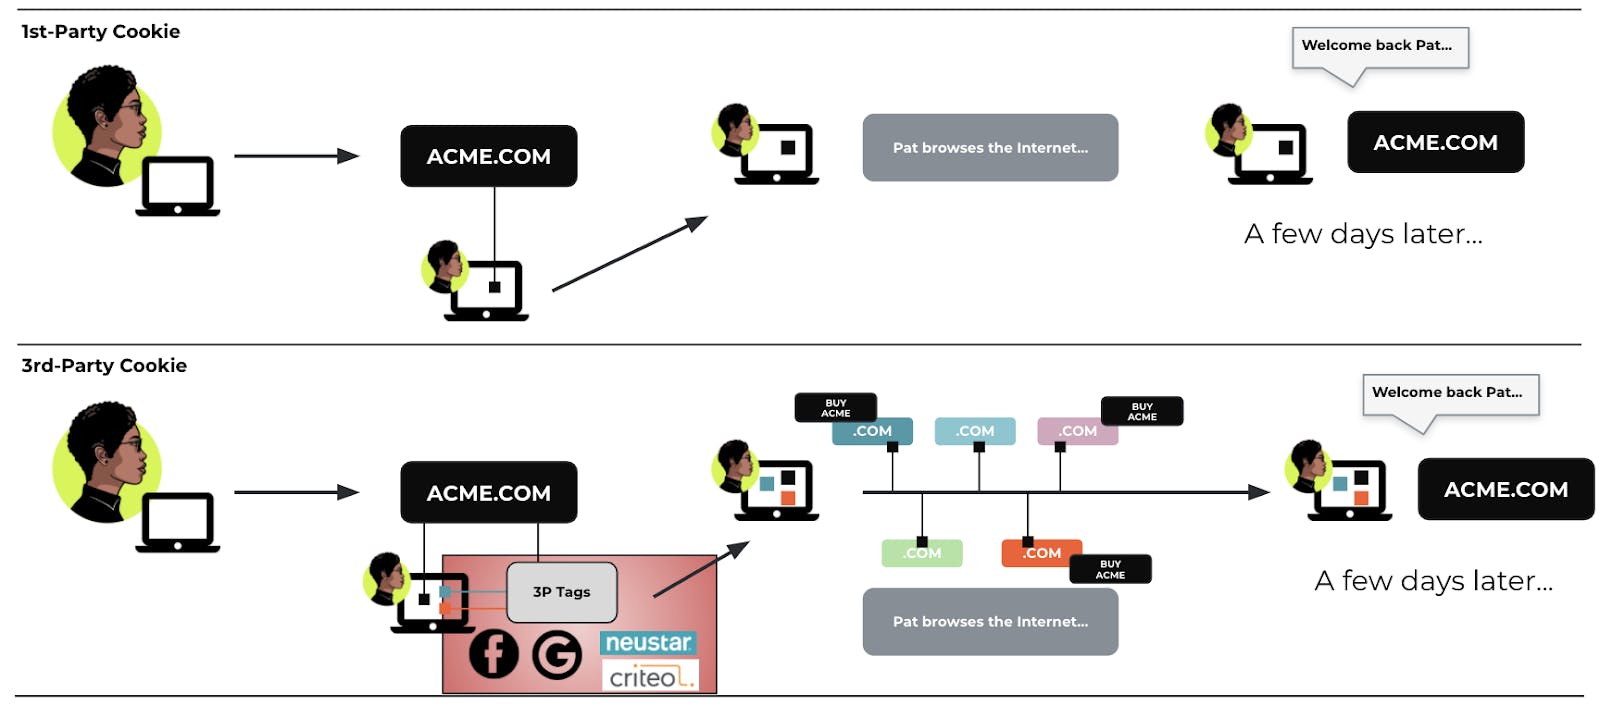 Diagram showing the different platforms and process involved in 1st party vs 3rd party cookie 